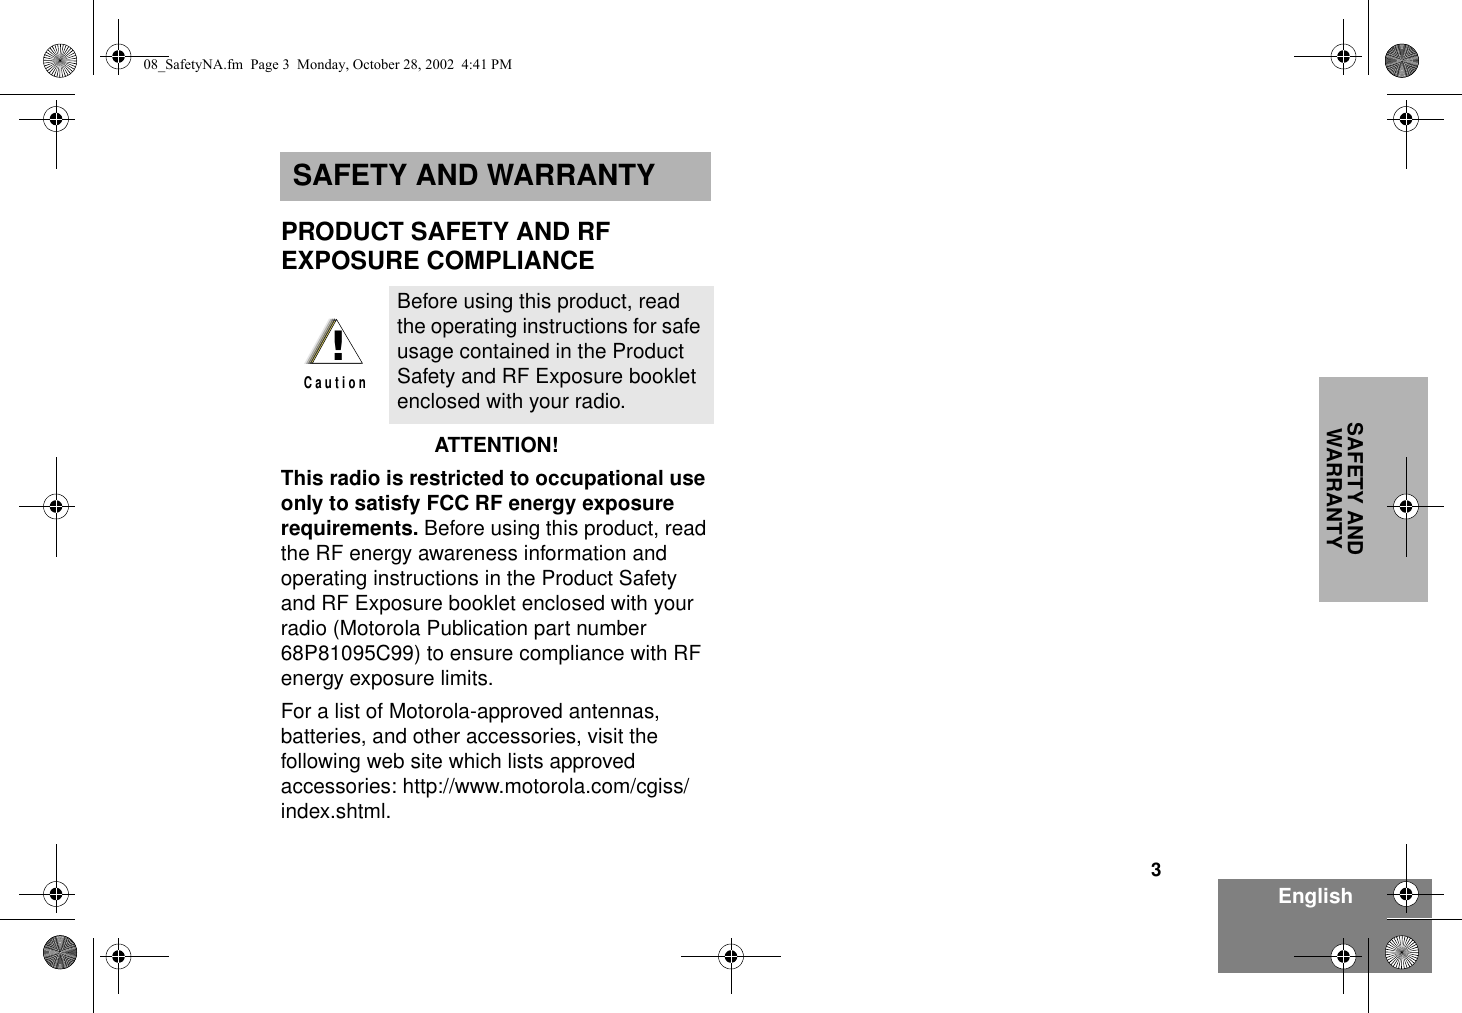 3EnglishSAFETY AND WARRANTYSAFETY AND WARRANTYPRODUCT SAFETY AND RF EXPOSURE COMPLIANCEATTENTION!  This radio is restricted to occupational use only to satisfy FCC RF energy exposure requirements. Before using this product, read the RF energy awareness information and operating instructions in the Product Safety and RF Exposure booklet enclosed with your radio (Motorola Publication part number 68P81095C99) to ensure compliance with RF energy exposure limits.  For a list of Motorola-approved antennas, batteries, and other accessories, visit the following web site which lists approved accessories: http://www.motorola.com/cgiss/index.shtml.Before using this product, read the operating instructions for safe usage contained in the Product Safety and RF Exposure booklet enclosed with your radio.!C a u t i o n08_SafetyNA.fm  Page 3  Monday, October 28, 2002  4:41 PM